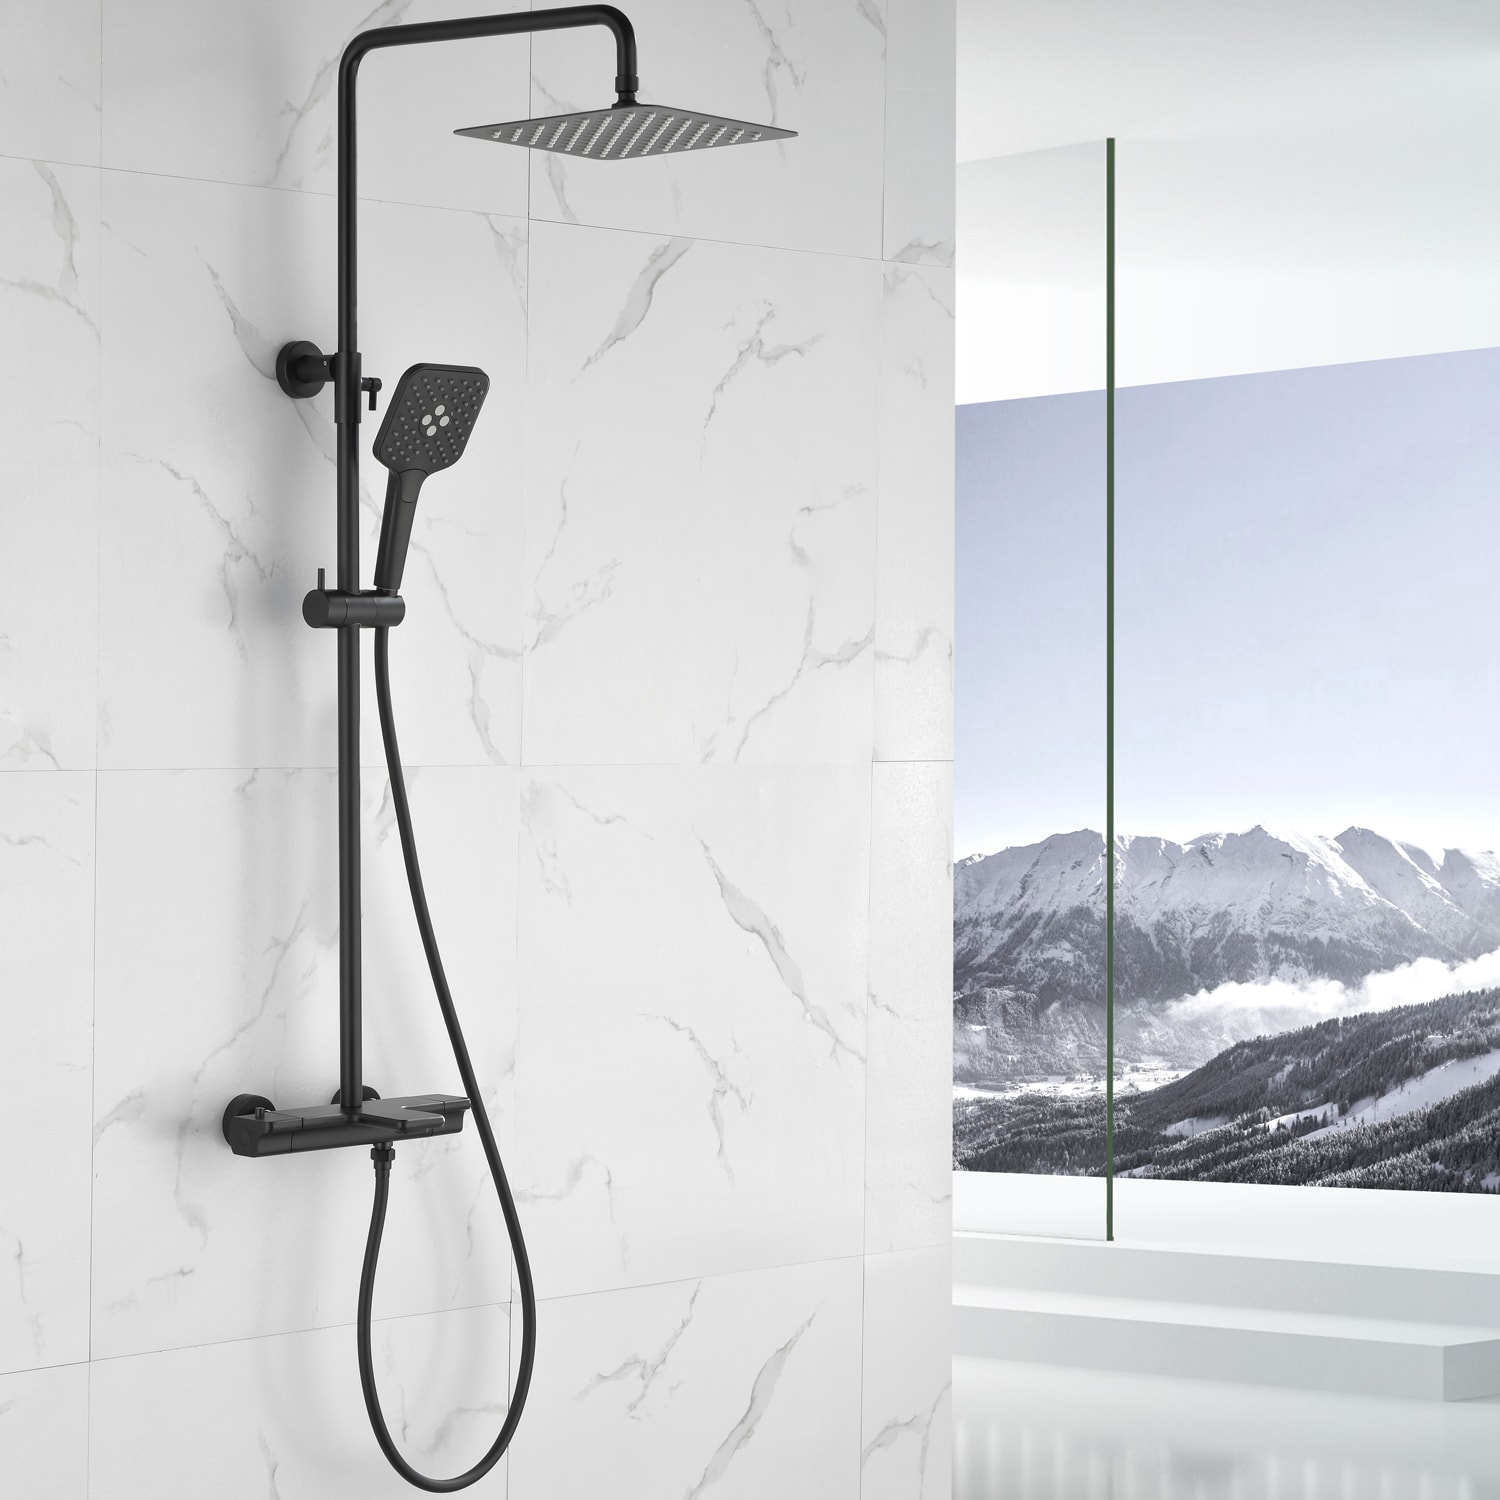 Pouuin Ob Matte Black Waterfall Shower Faucet Bar System with 4-way Diverter Valve Included